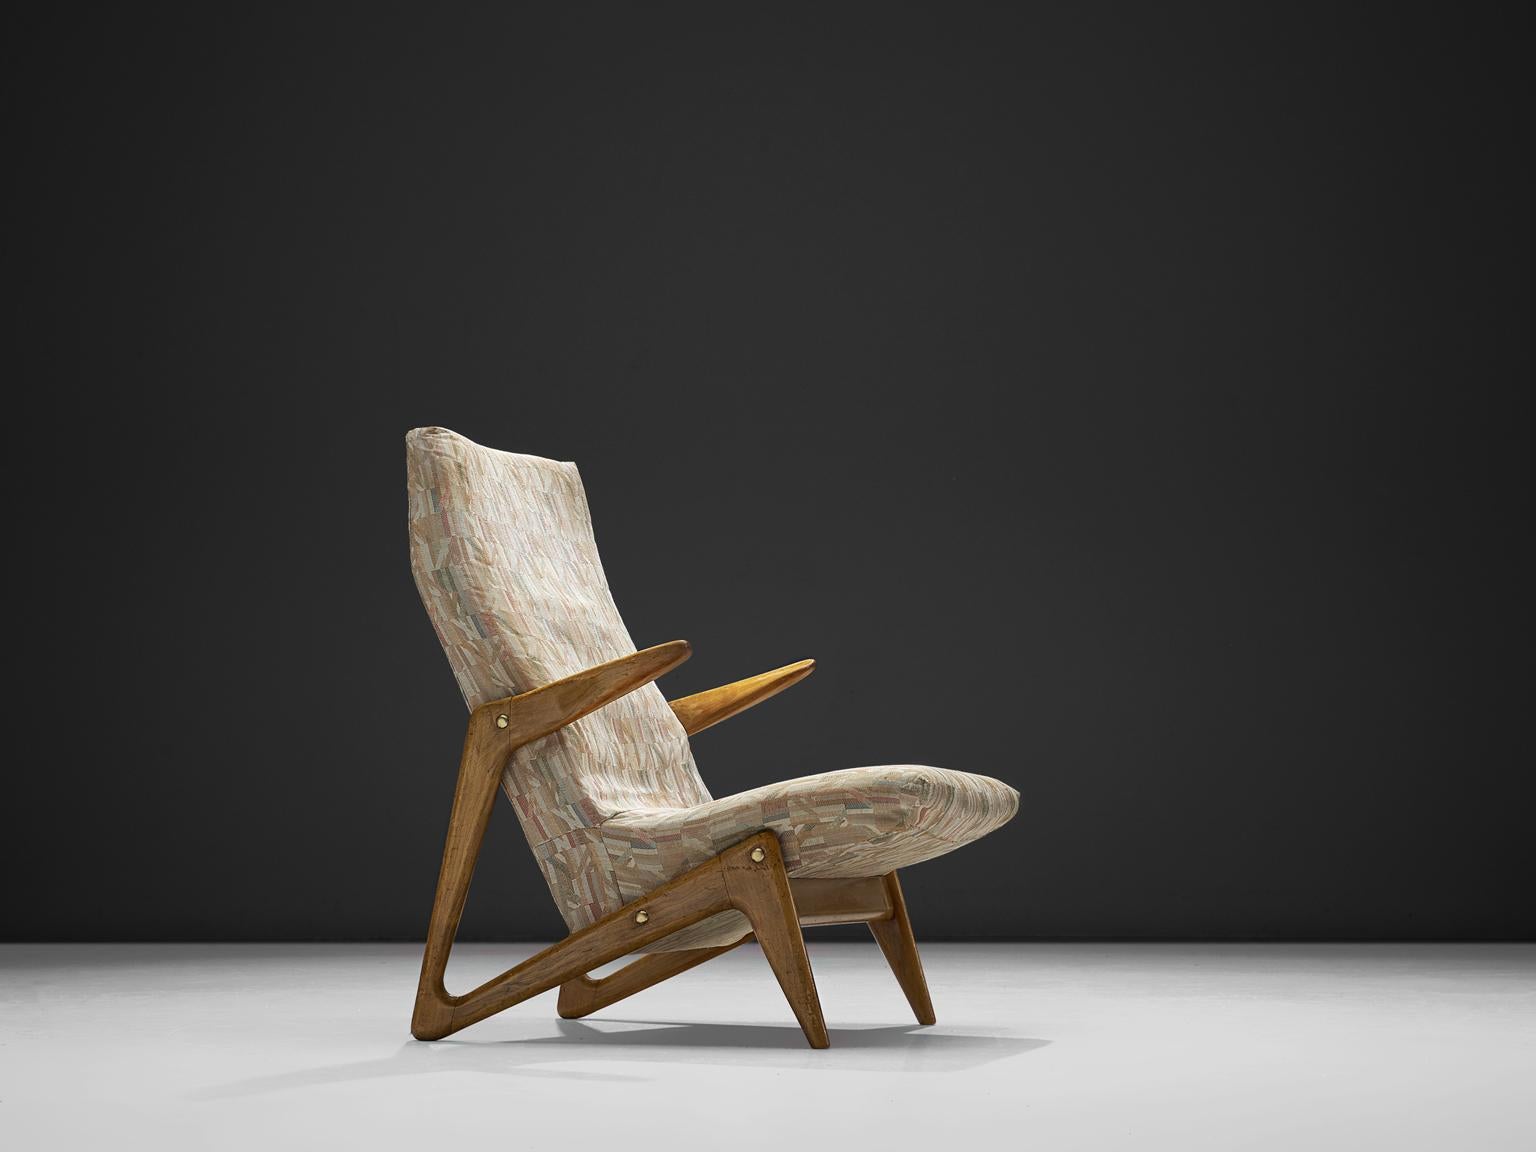 Lounge chair, fabric and walnut, Belgium, 1940s.

This well-detailed easy chair features an outstanding walnut frame in which the legs and armrest form one line. The piece is attributed to Alfred Hendrickx for belform. The chair has a sculptural